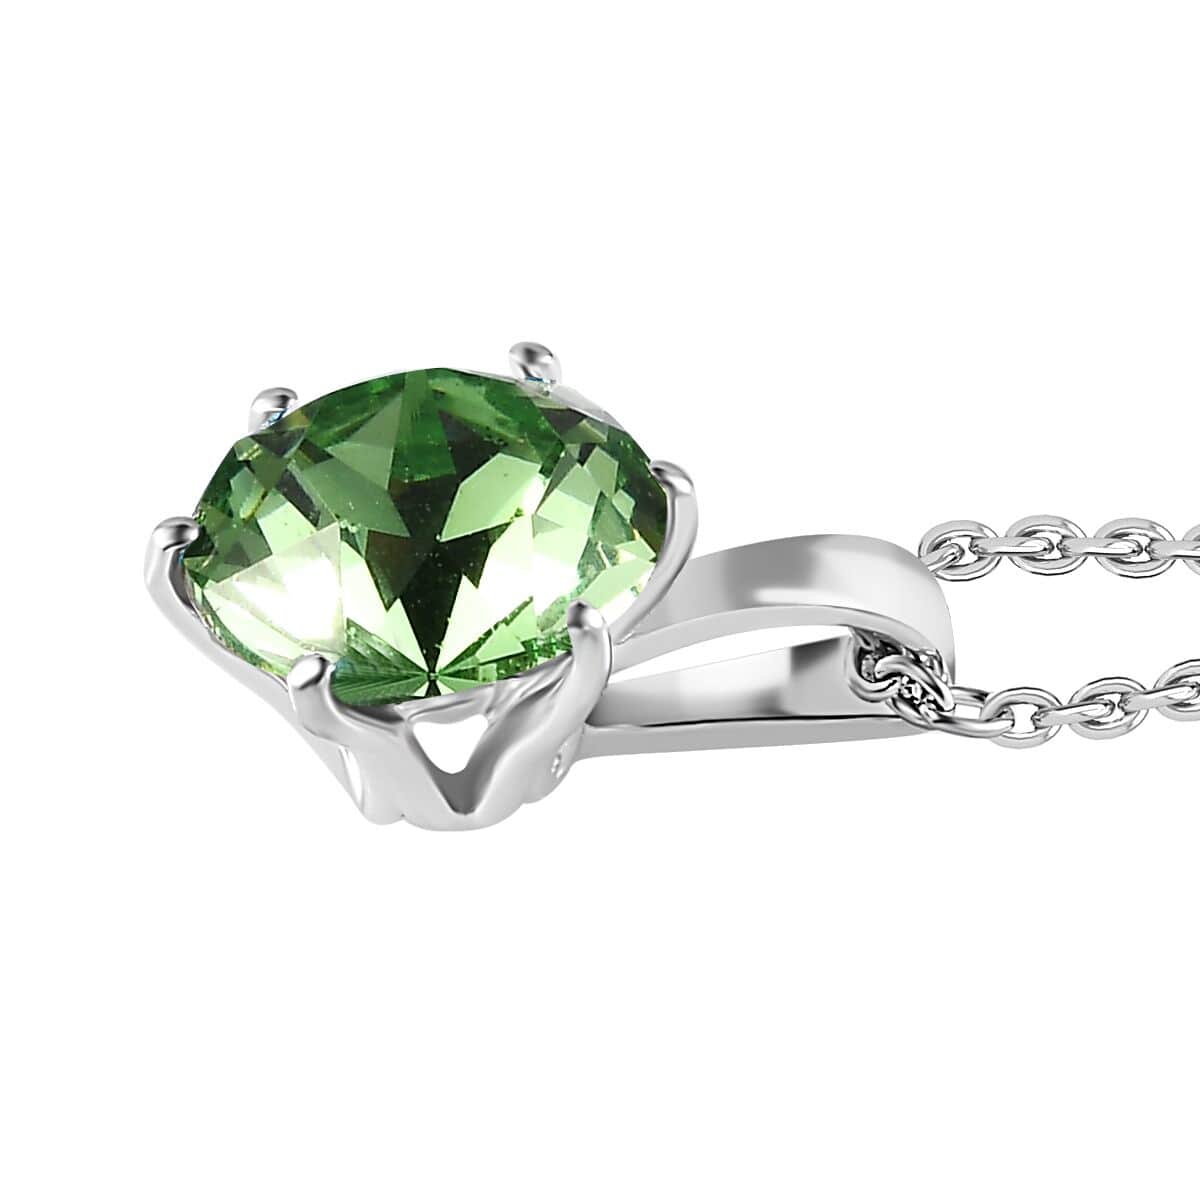 Designer Premium Peridot Color Austrian Crystal Solitaire Pendant in Sterling Silver with Stainless Steel Necklace 20 Inches image number 3